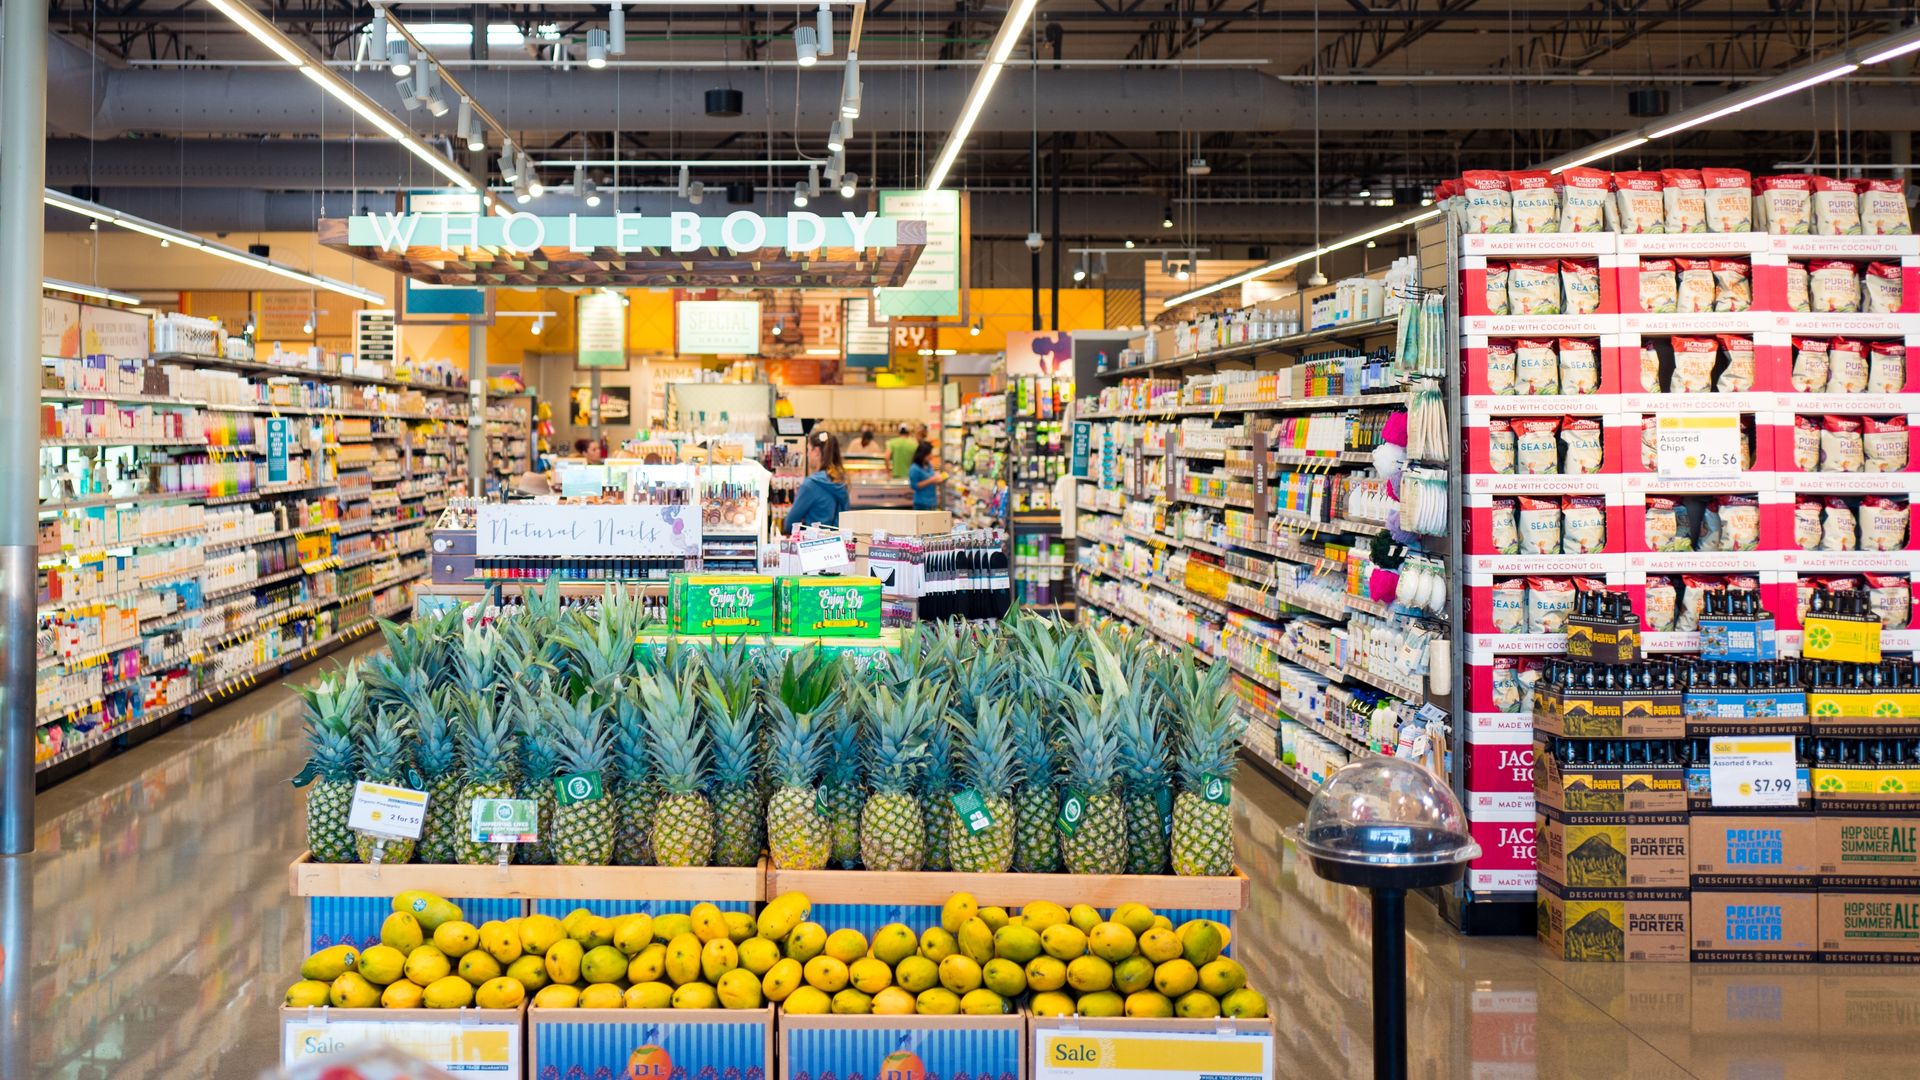 A headlong view of a Whole Foods aisle stocked with colorful boxes